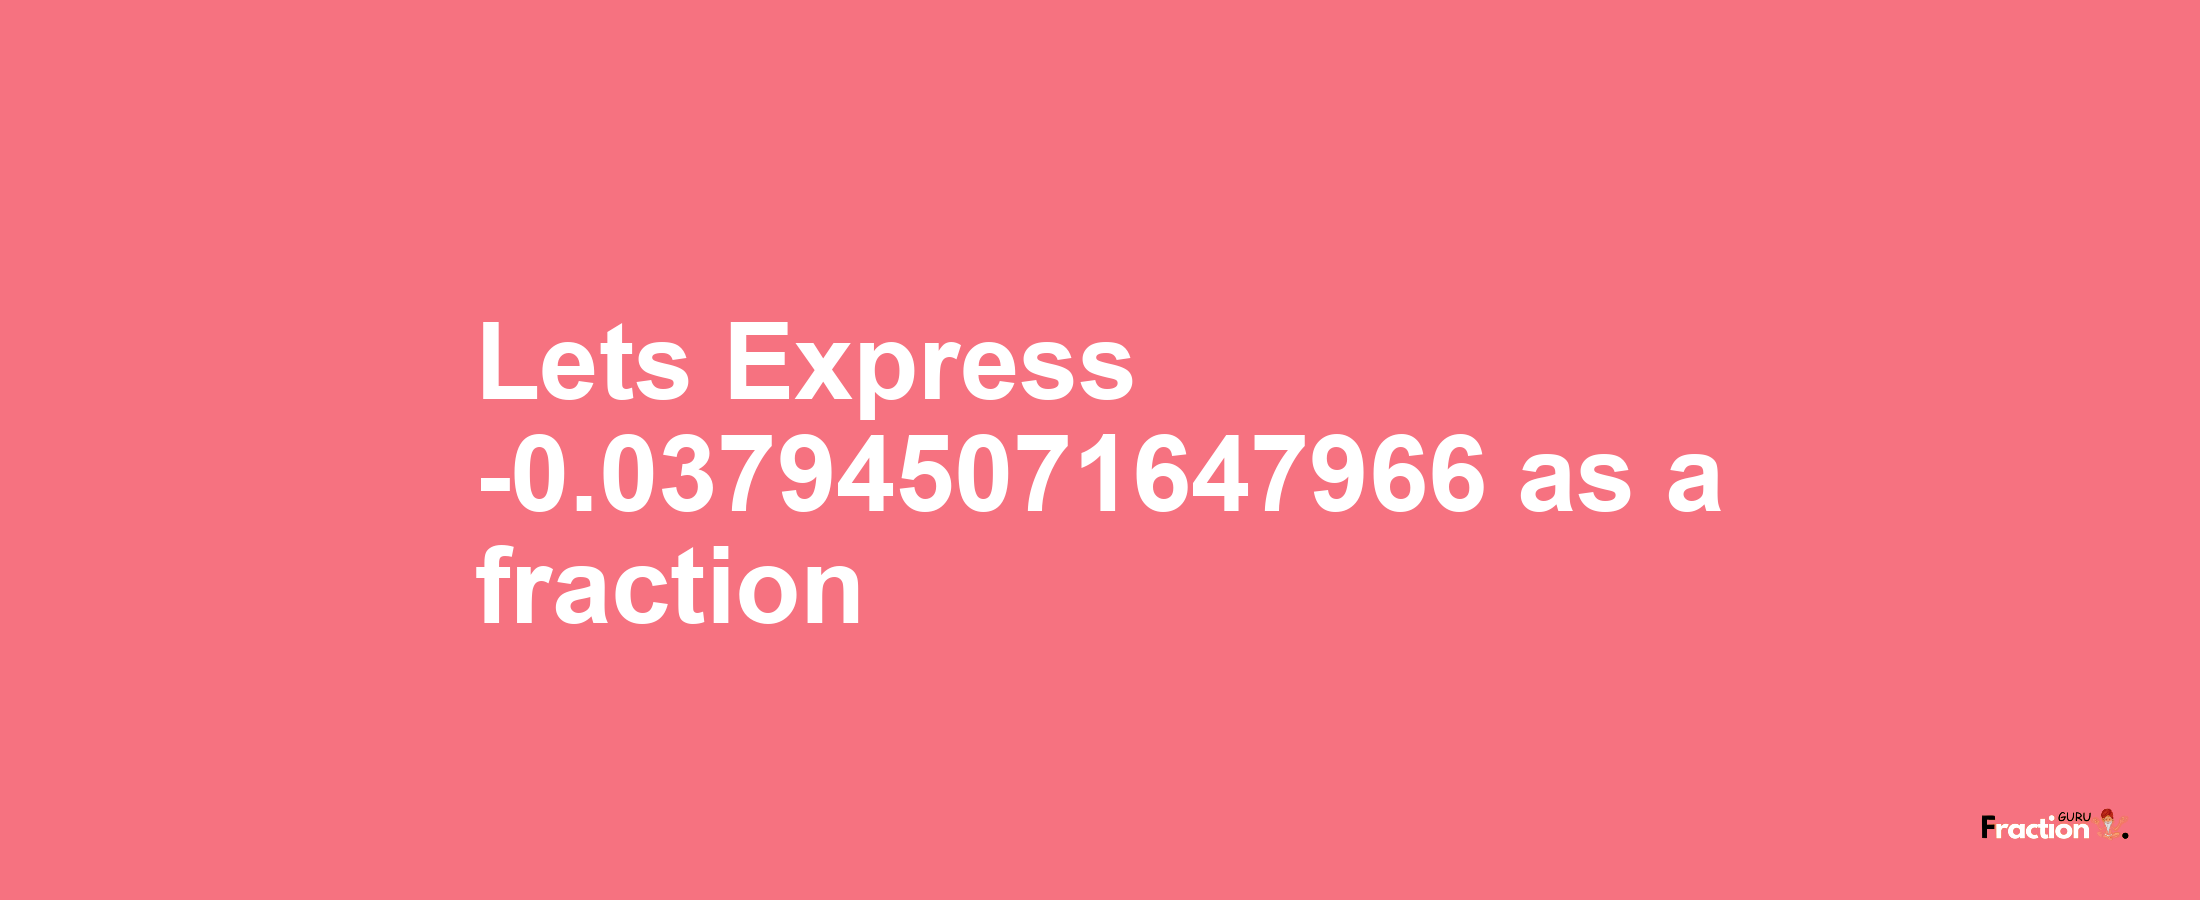 Lets Express -0.037945071647966 as afraction